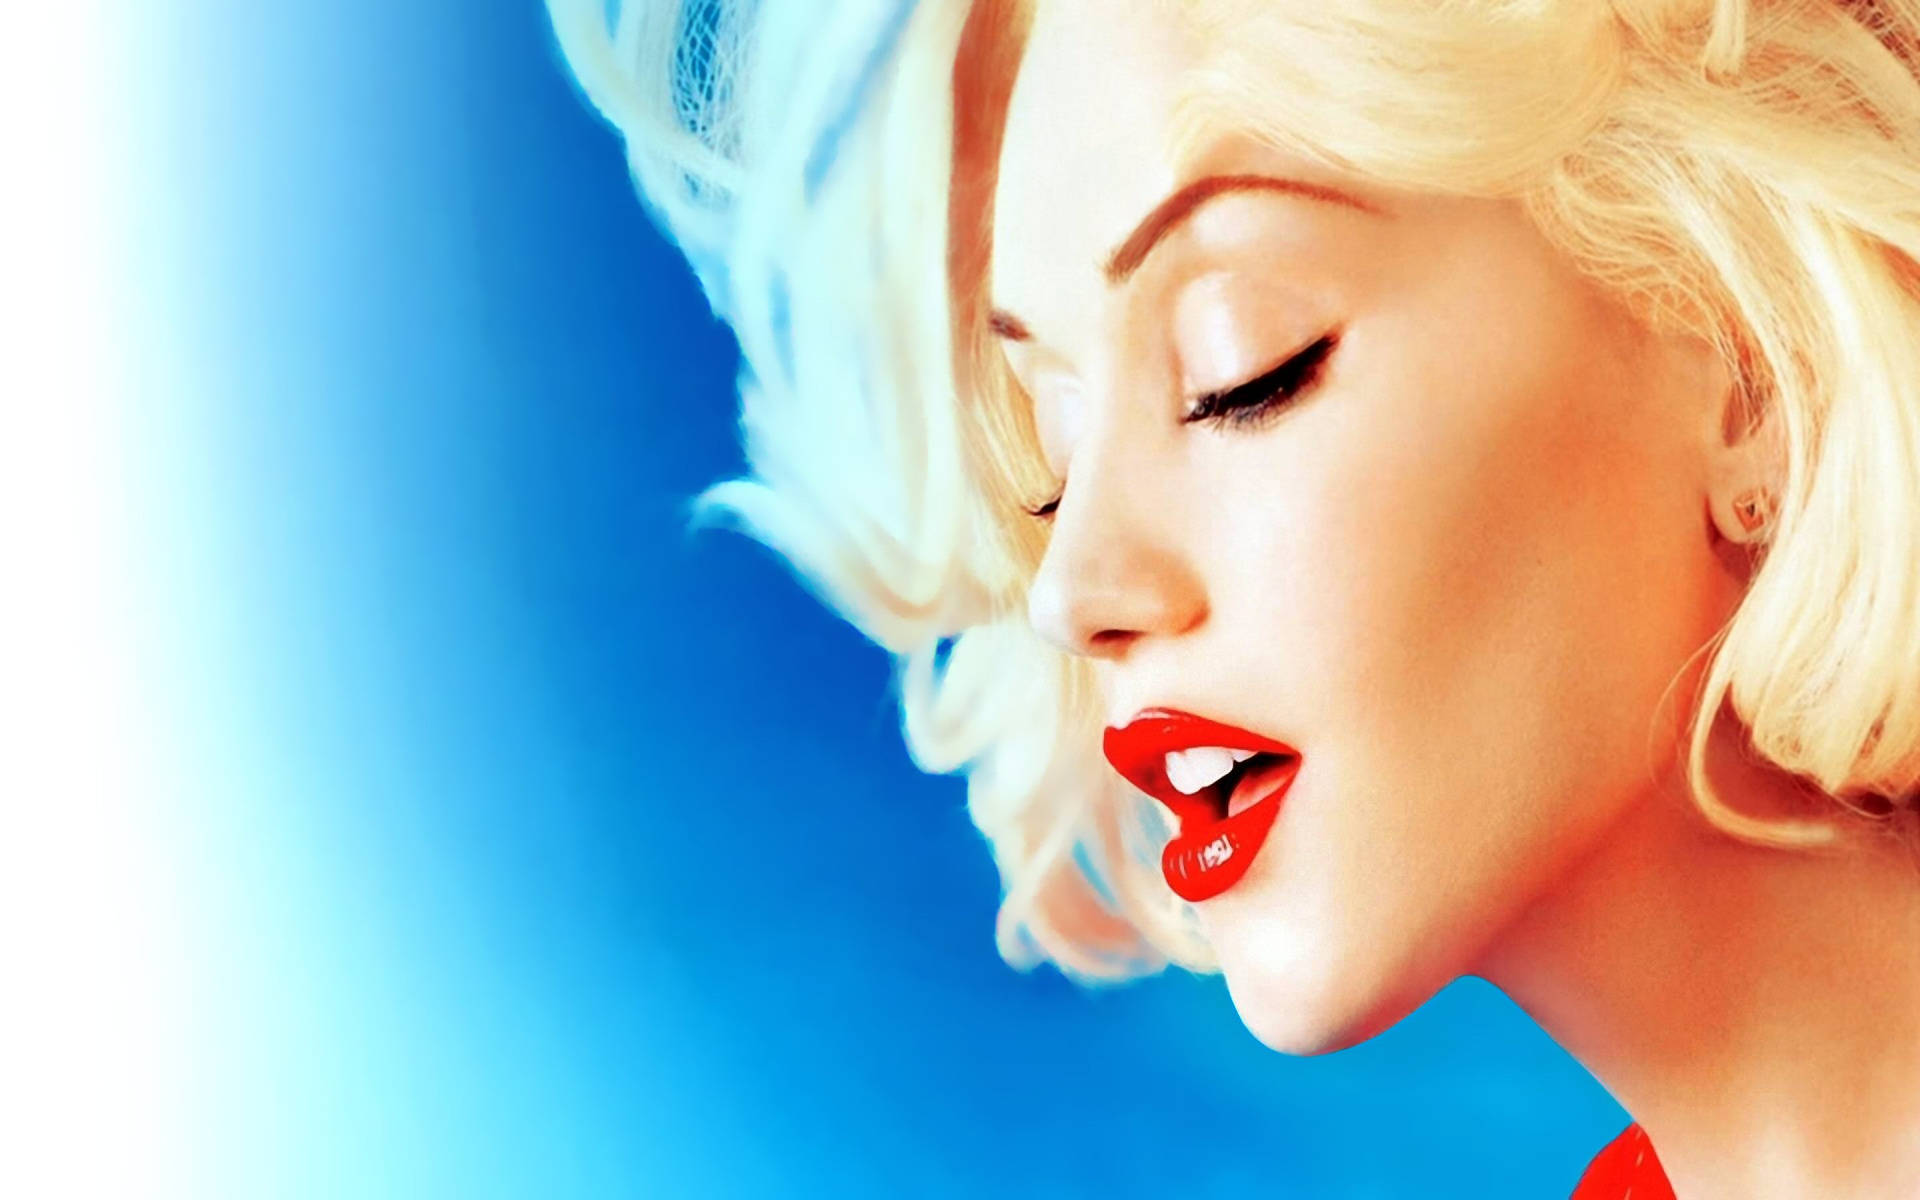 Gwen Stefani With Red Lips